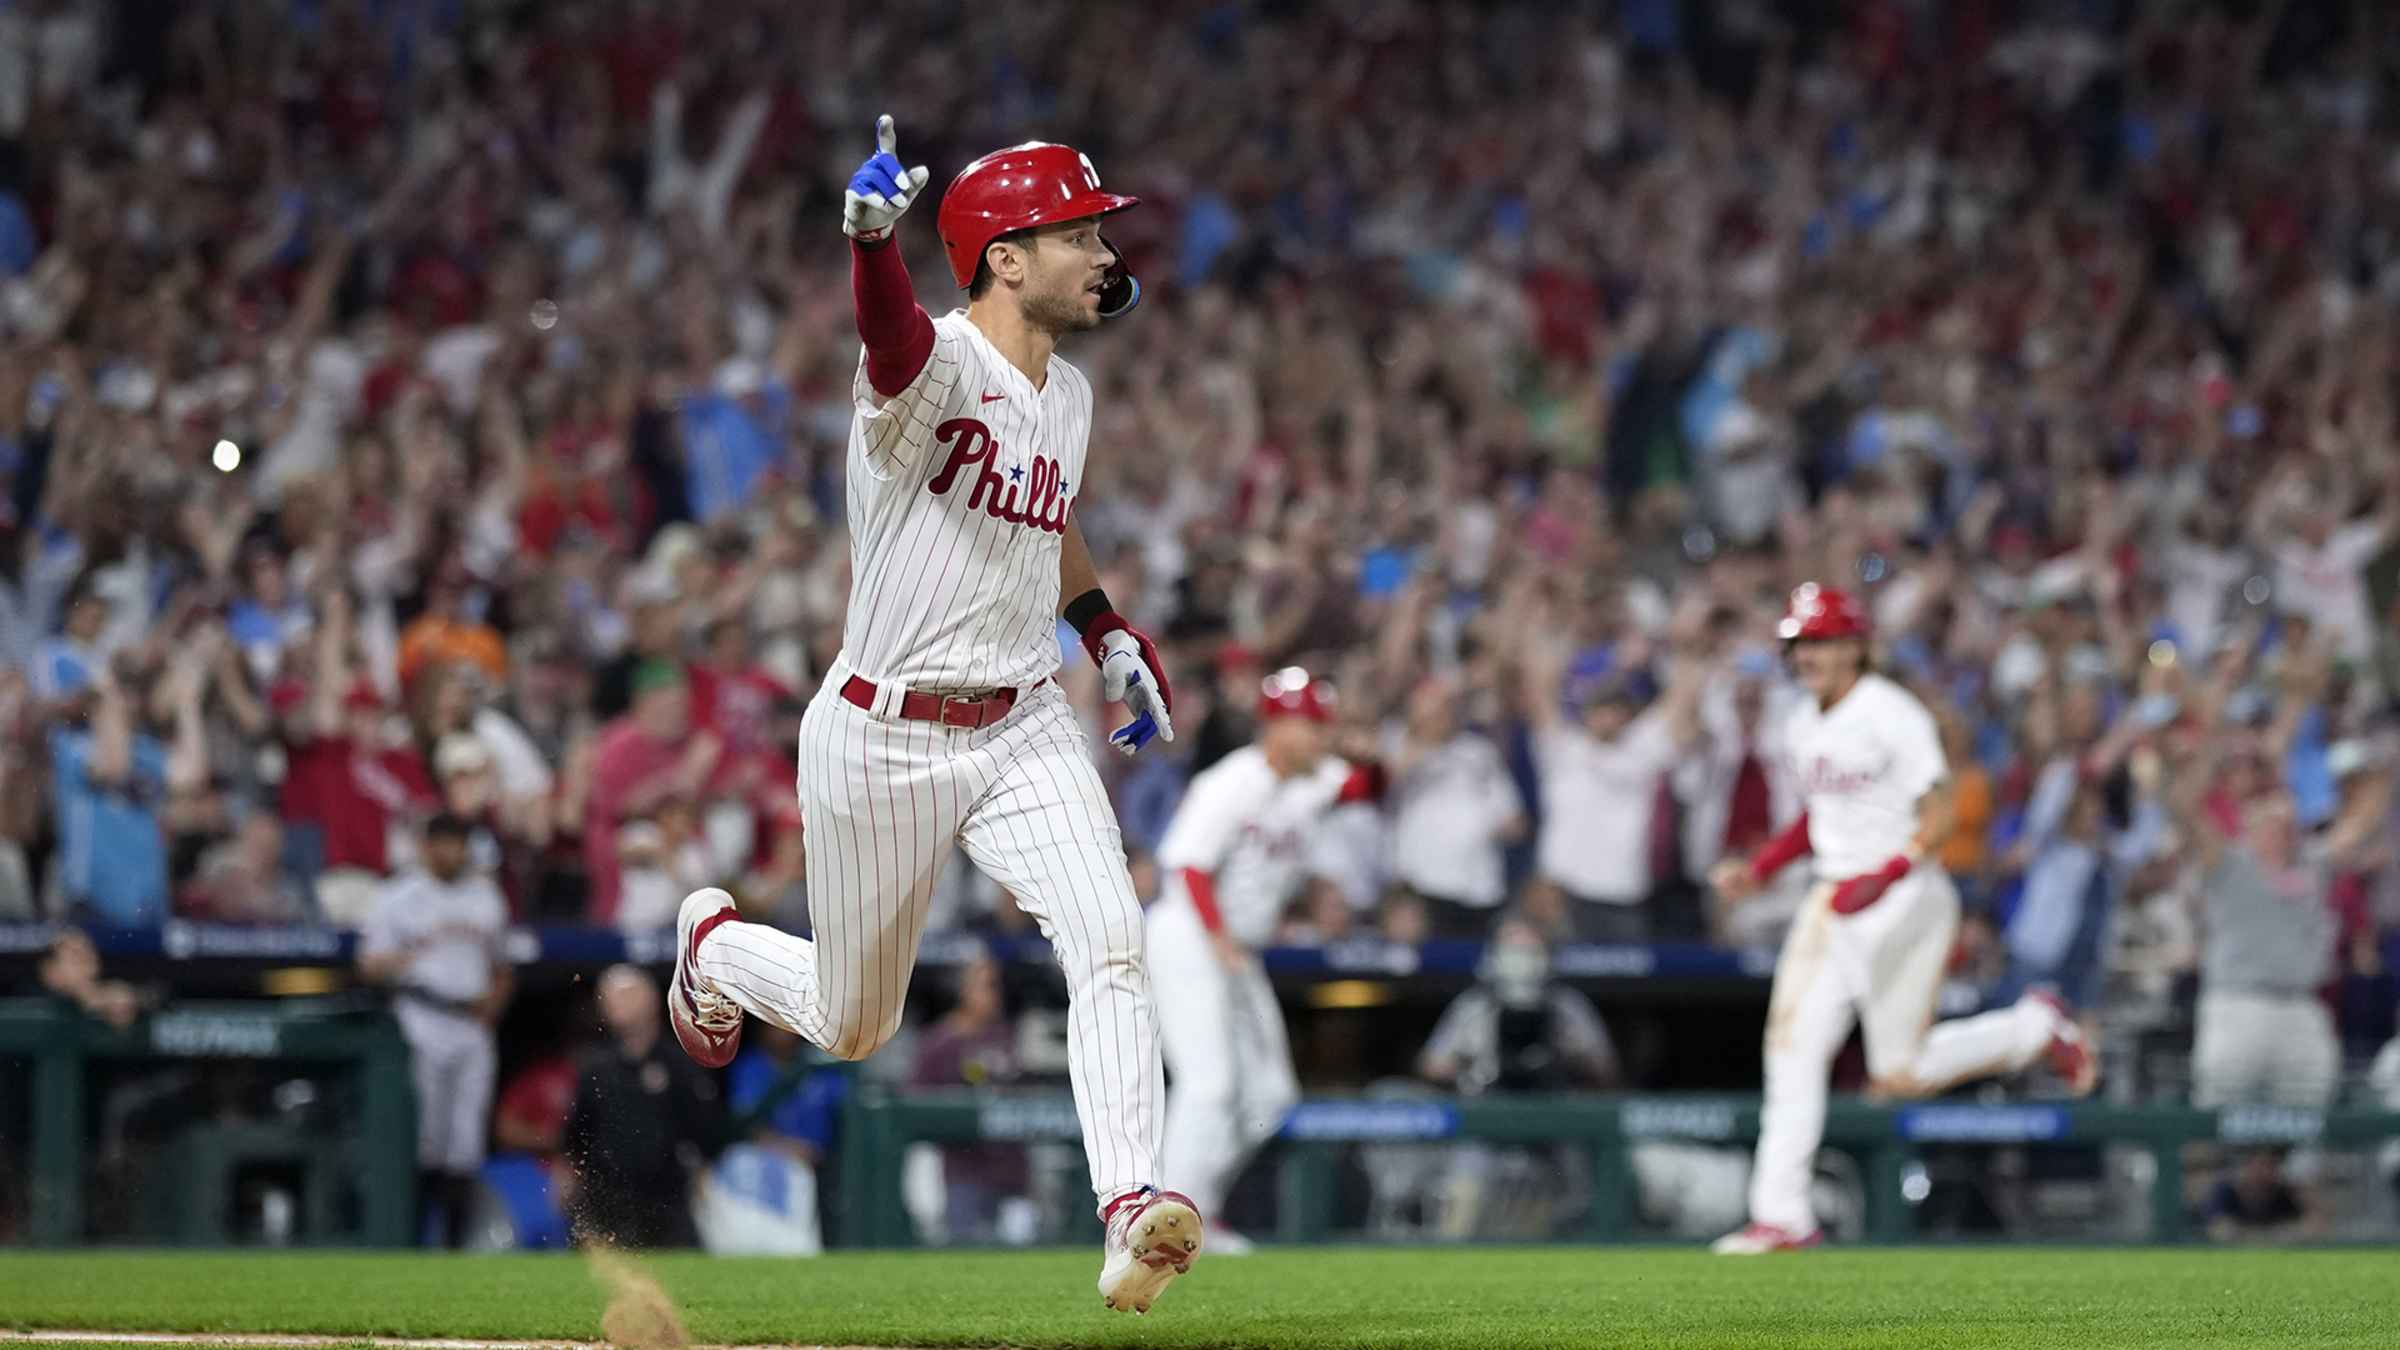 What to expect in Trea Turner's first season as Phillies shortstop